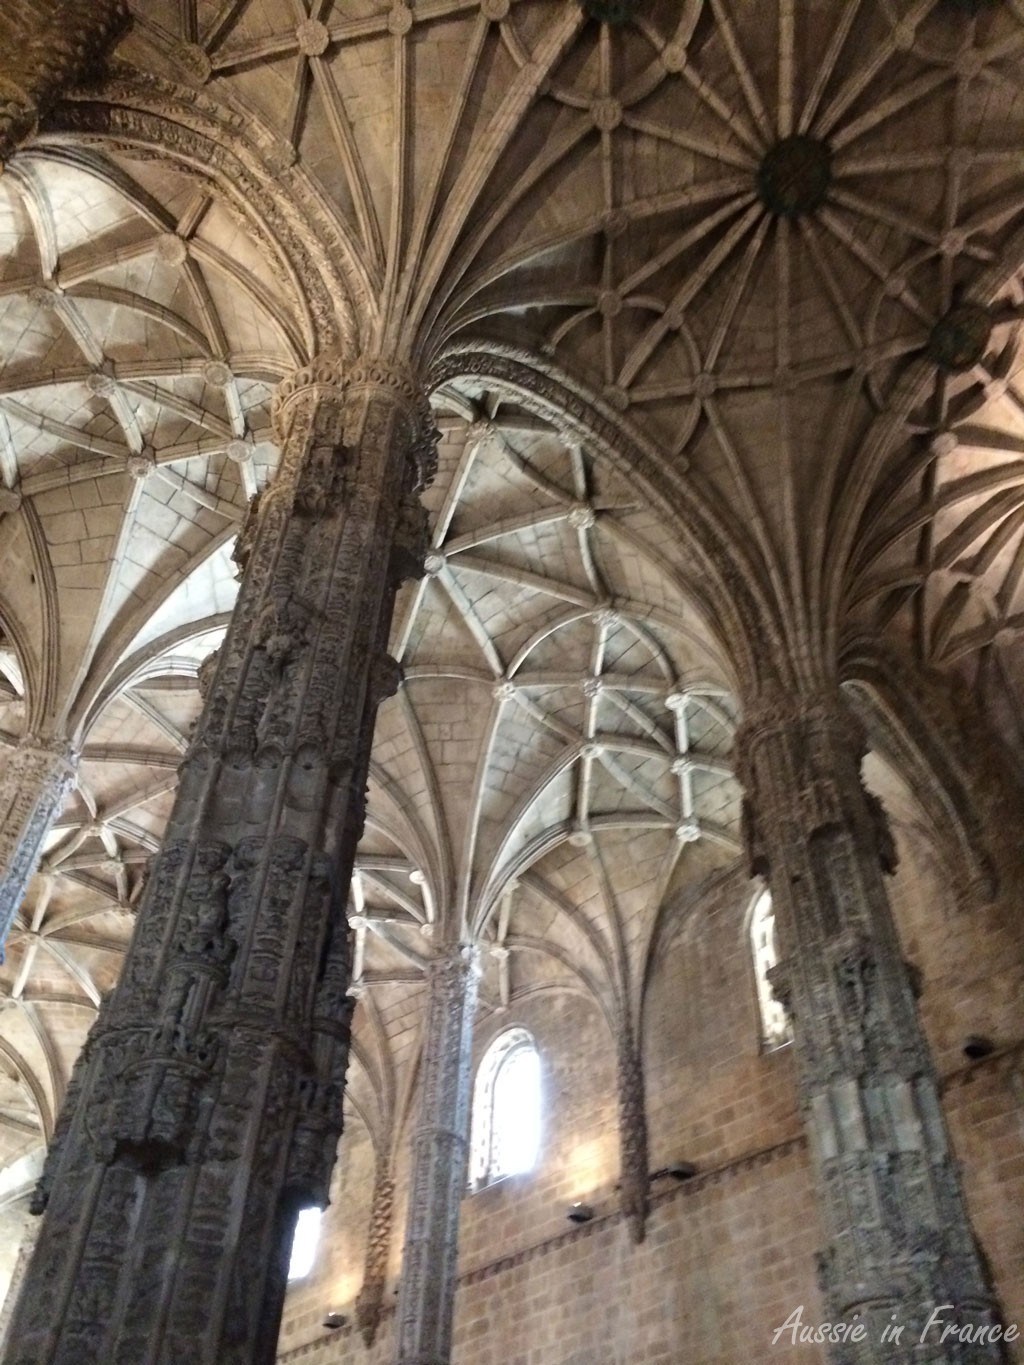 The columns inside the church at Jeronimos Monastery